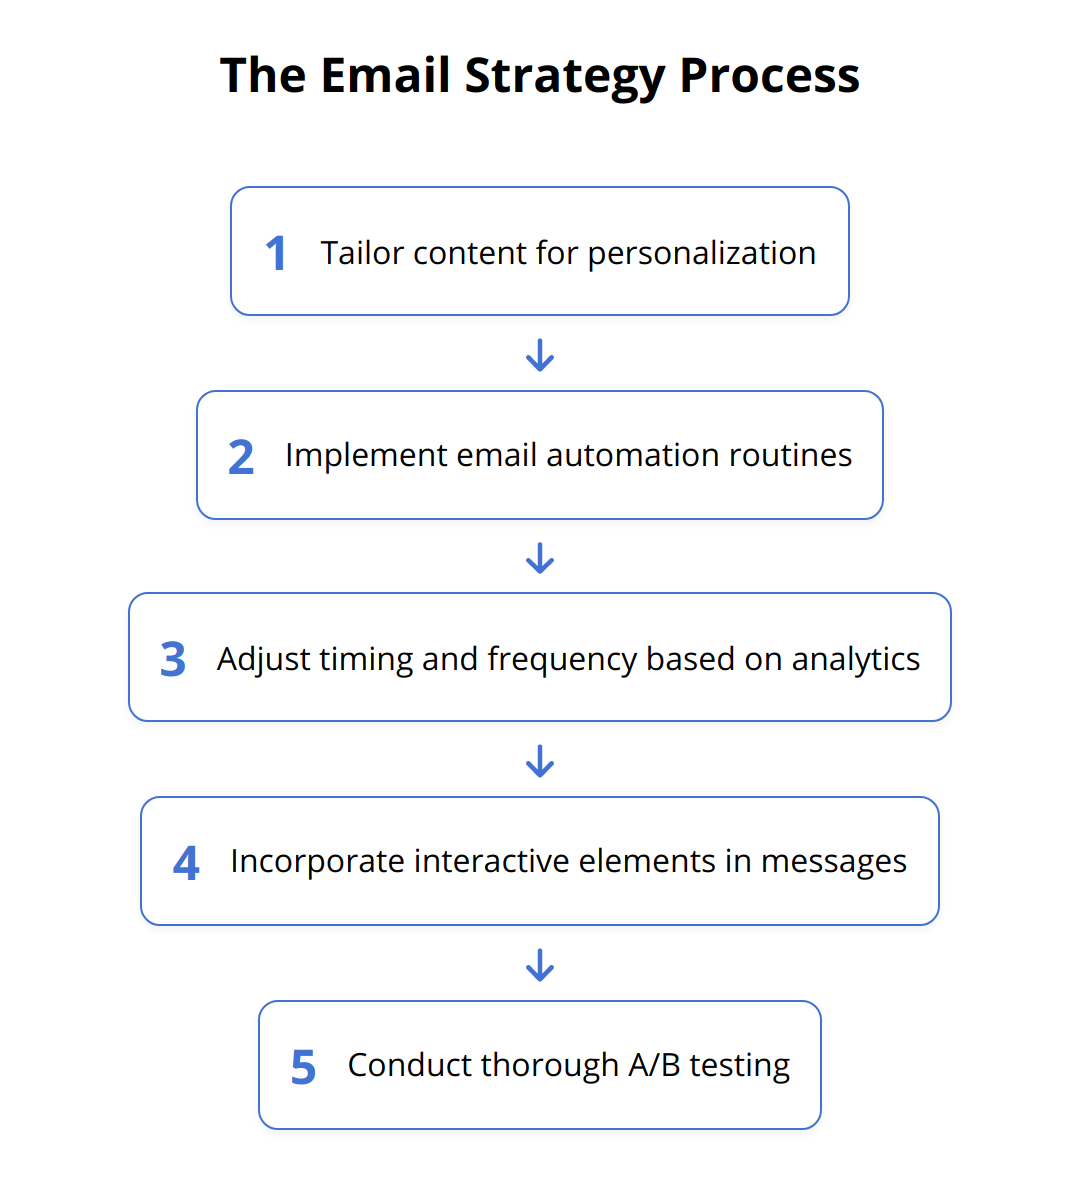 Flow Chart - The Email Strategy Process